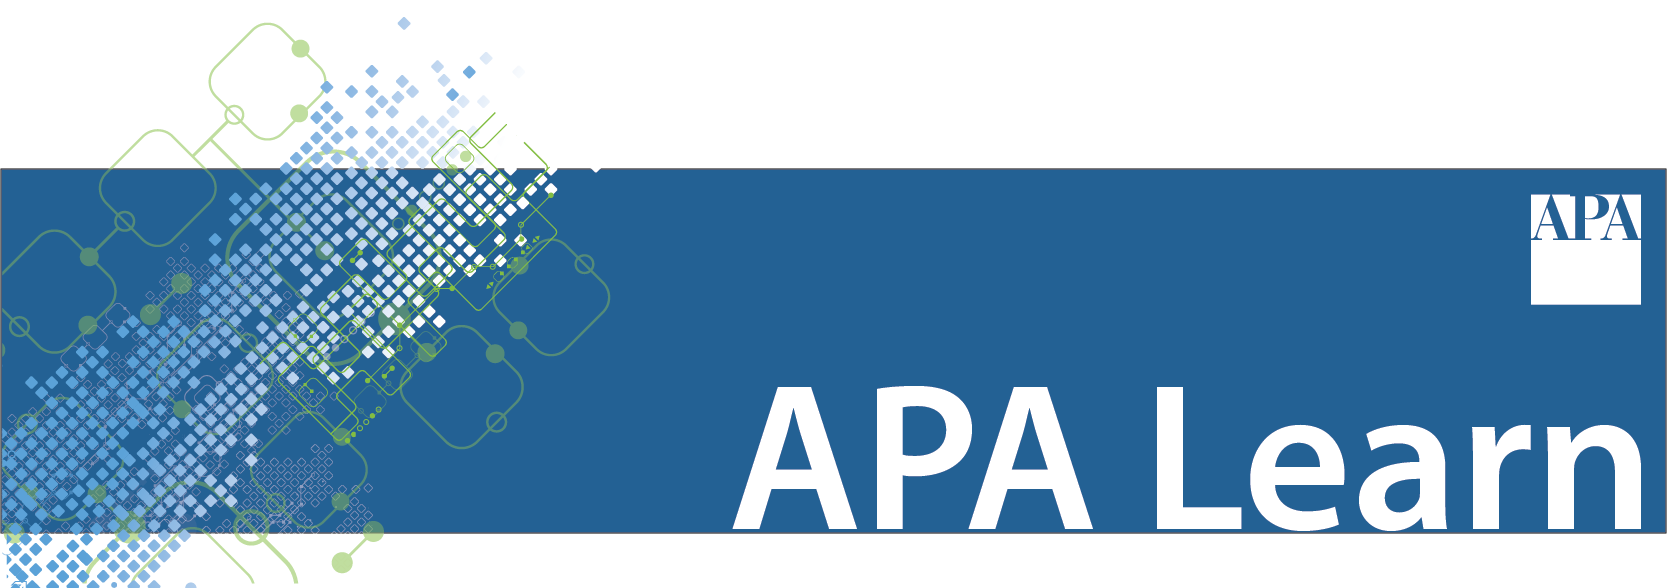 APA Learn Home mobile header background image